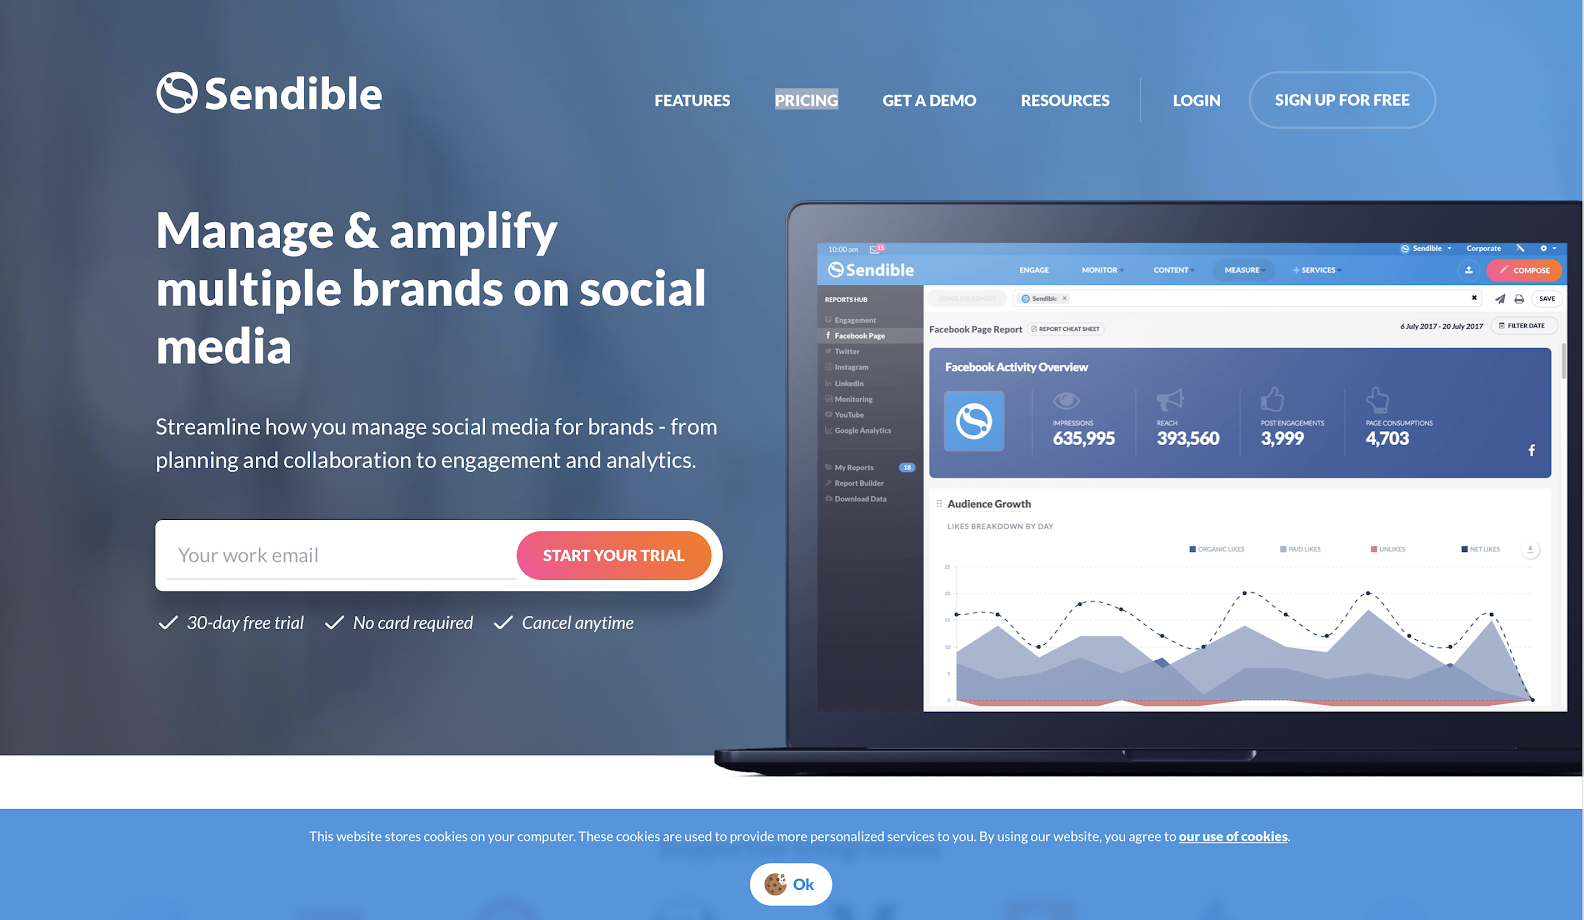 10 Of The Best Social Media Management Tools To Boost Your Campaign This 2020 sendible 